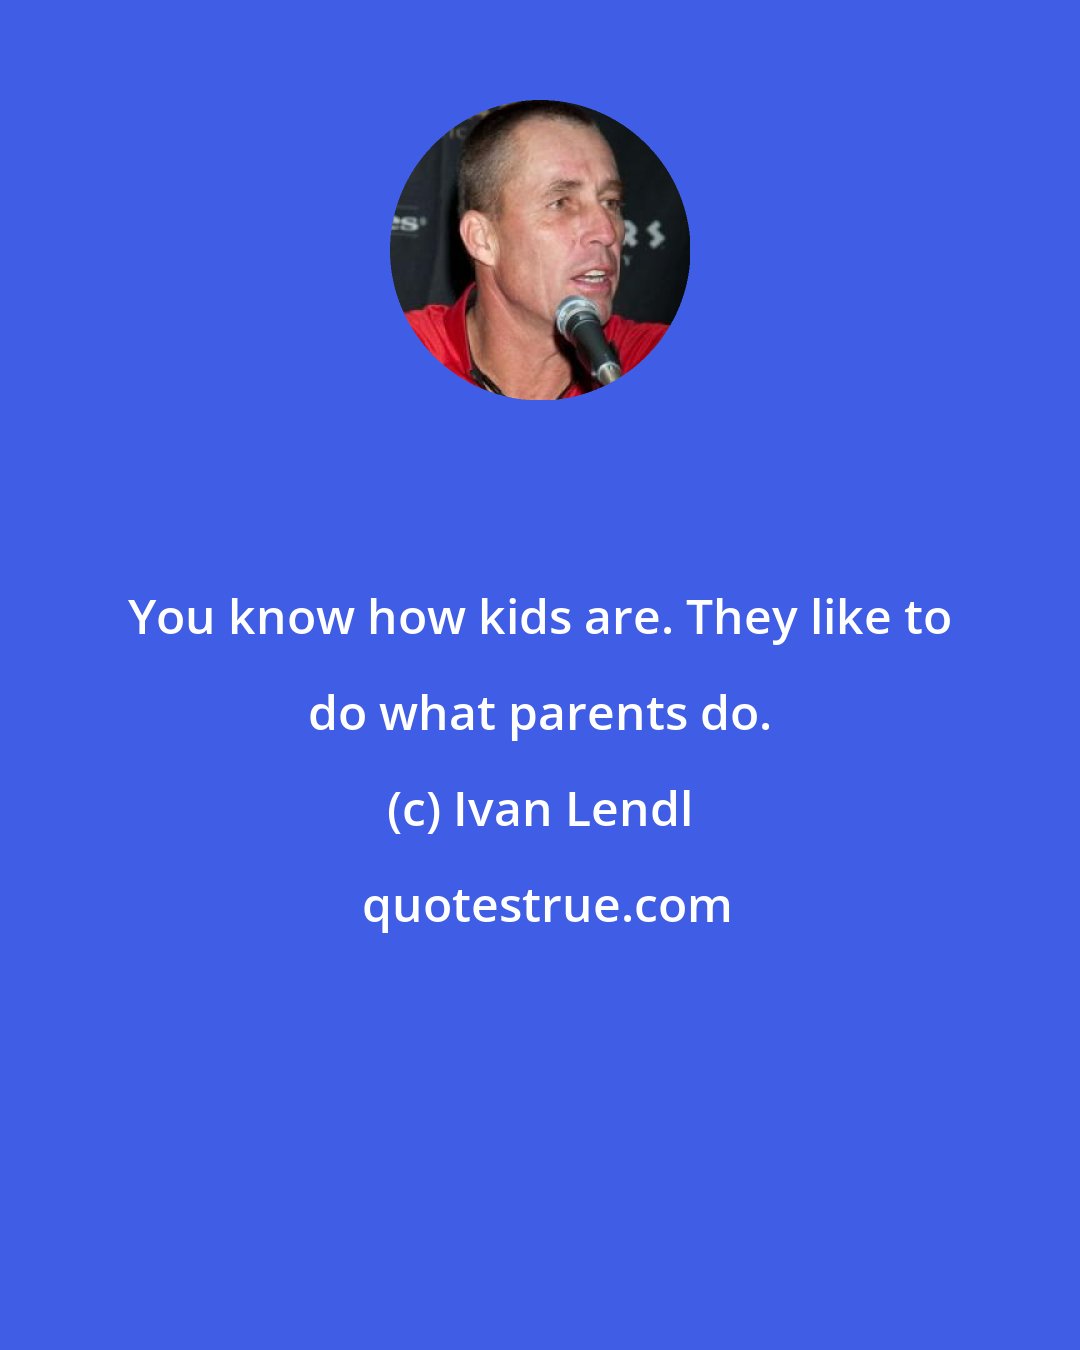 Ivan Lendl: You know how kids are. They like to do what parents do.